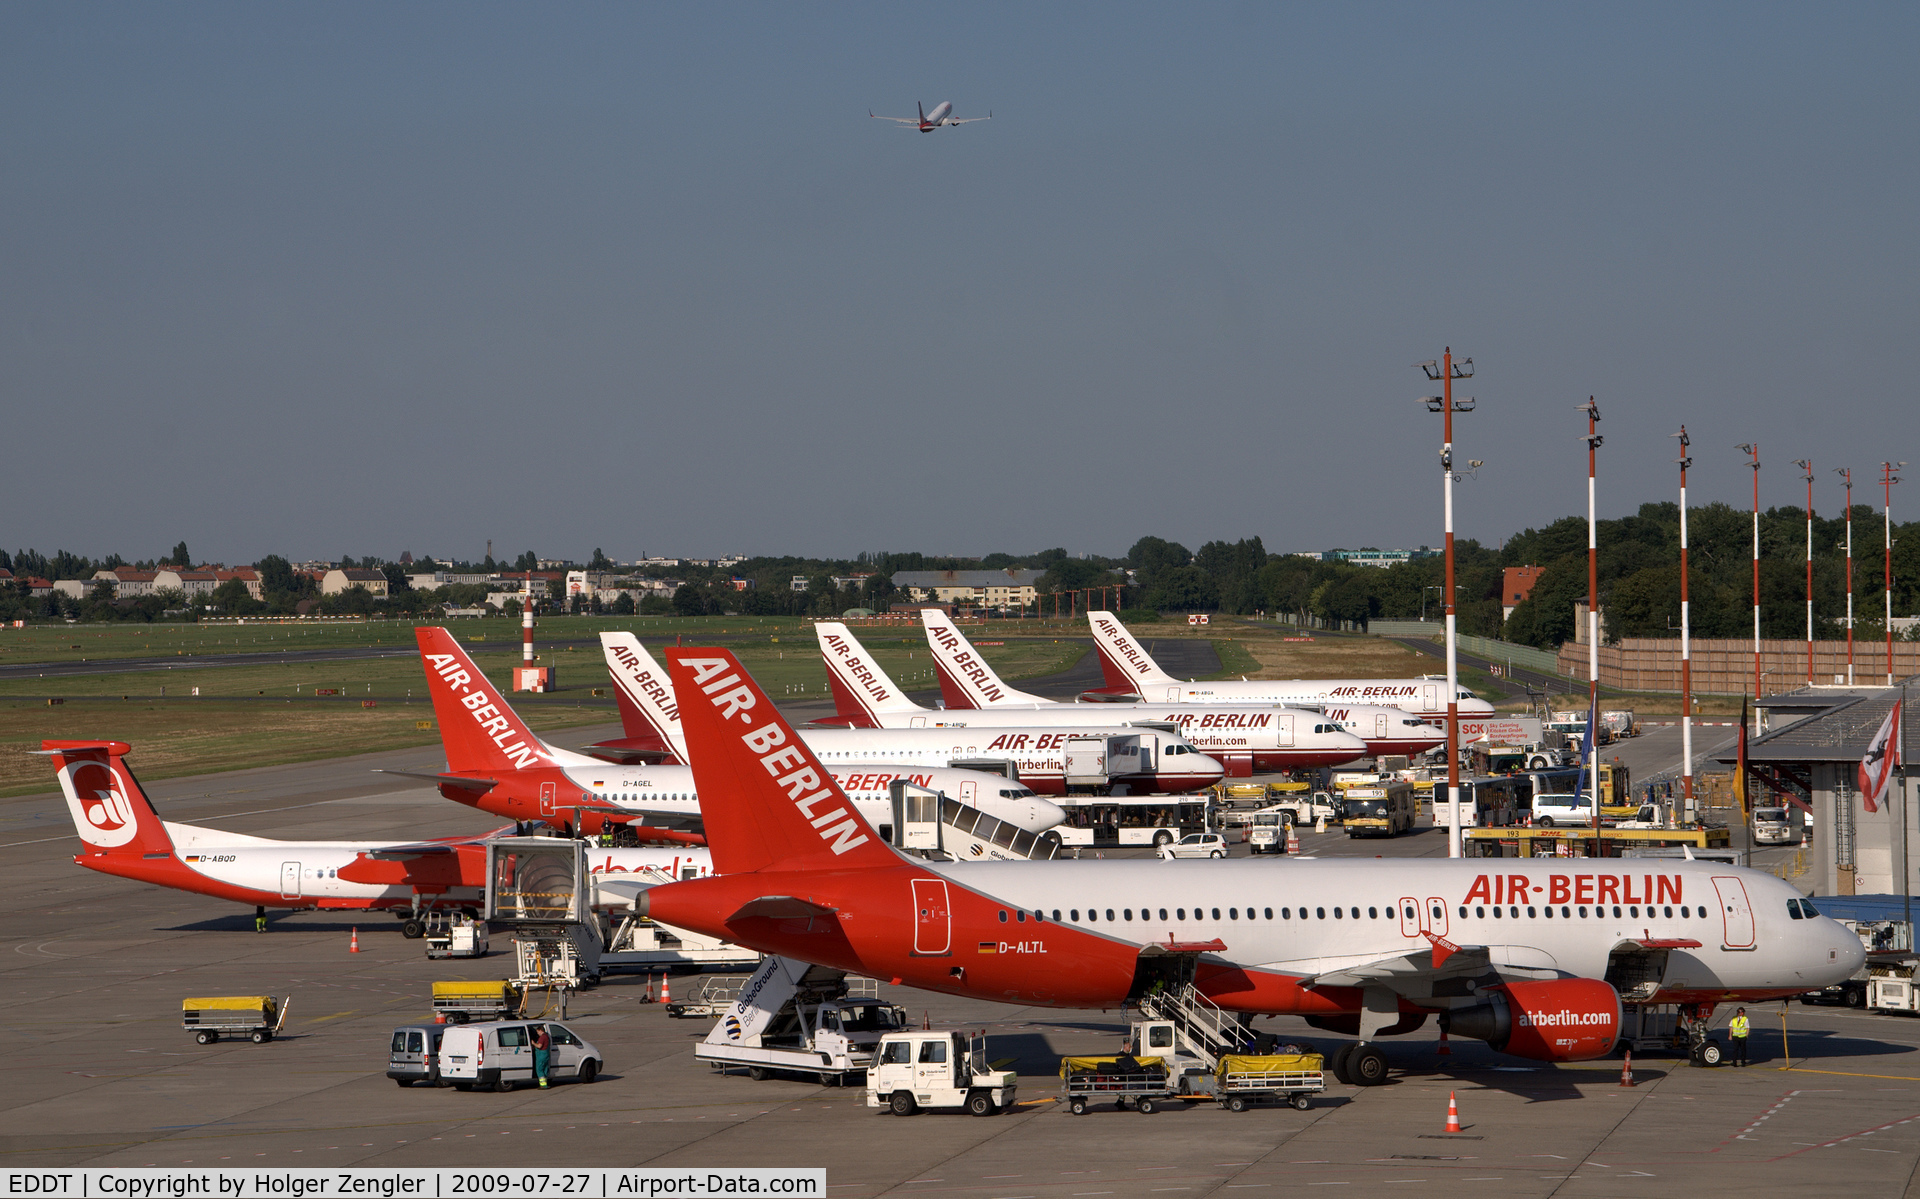 Tegel International Airport (closing in 2011), Berlin Germany (EDDT) - Wonder why the sky isn´t red and white.....